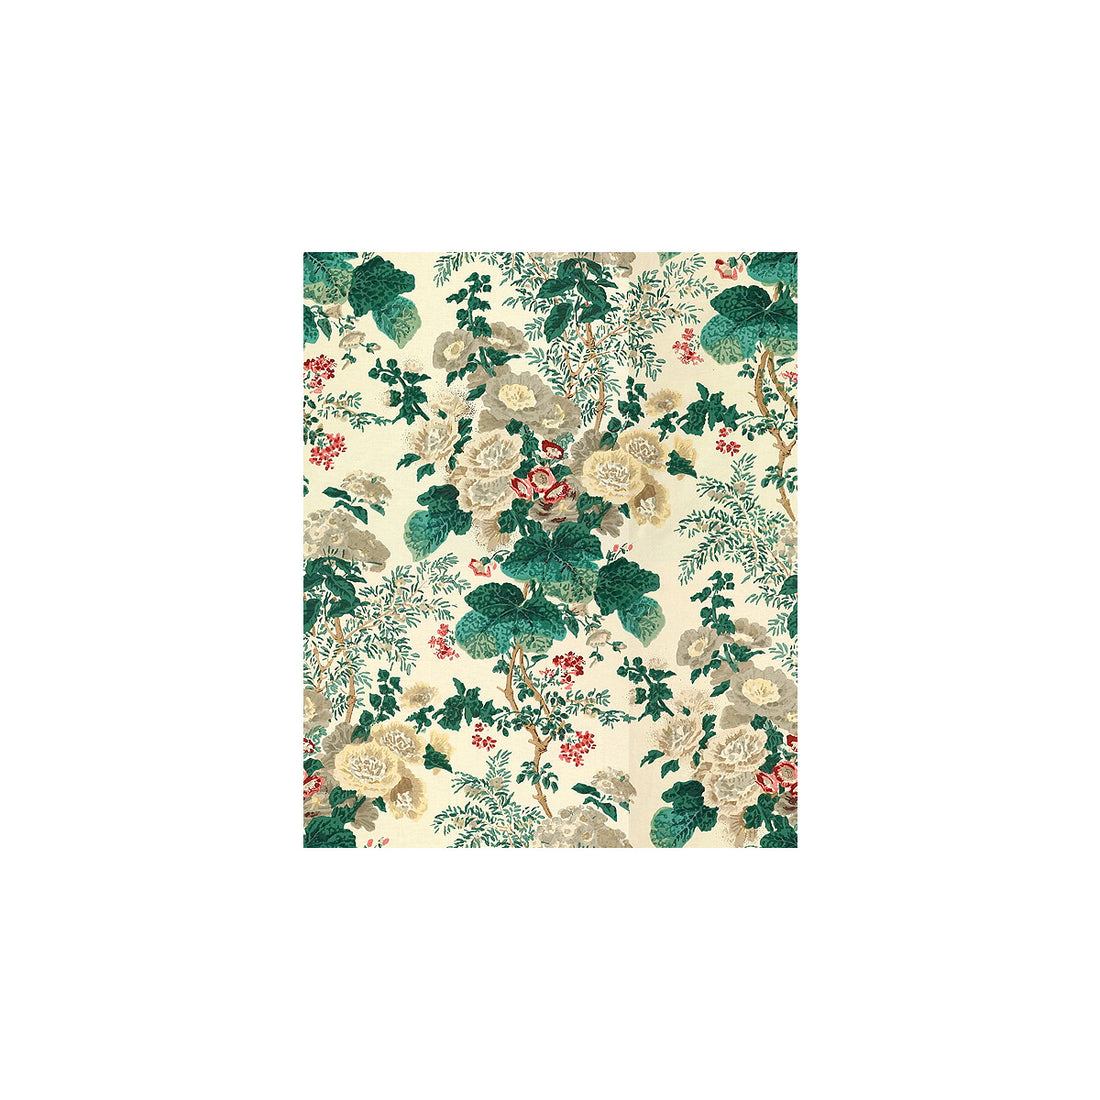 Hollyhock Hdb fabric in white/brown color - pattern HOLLYHOCK HAND.WHT-BRO.0 - by Lee Jofa